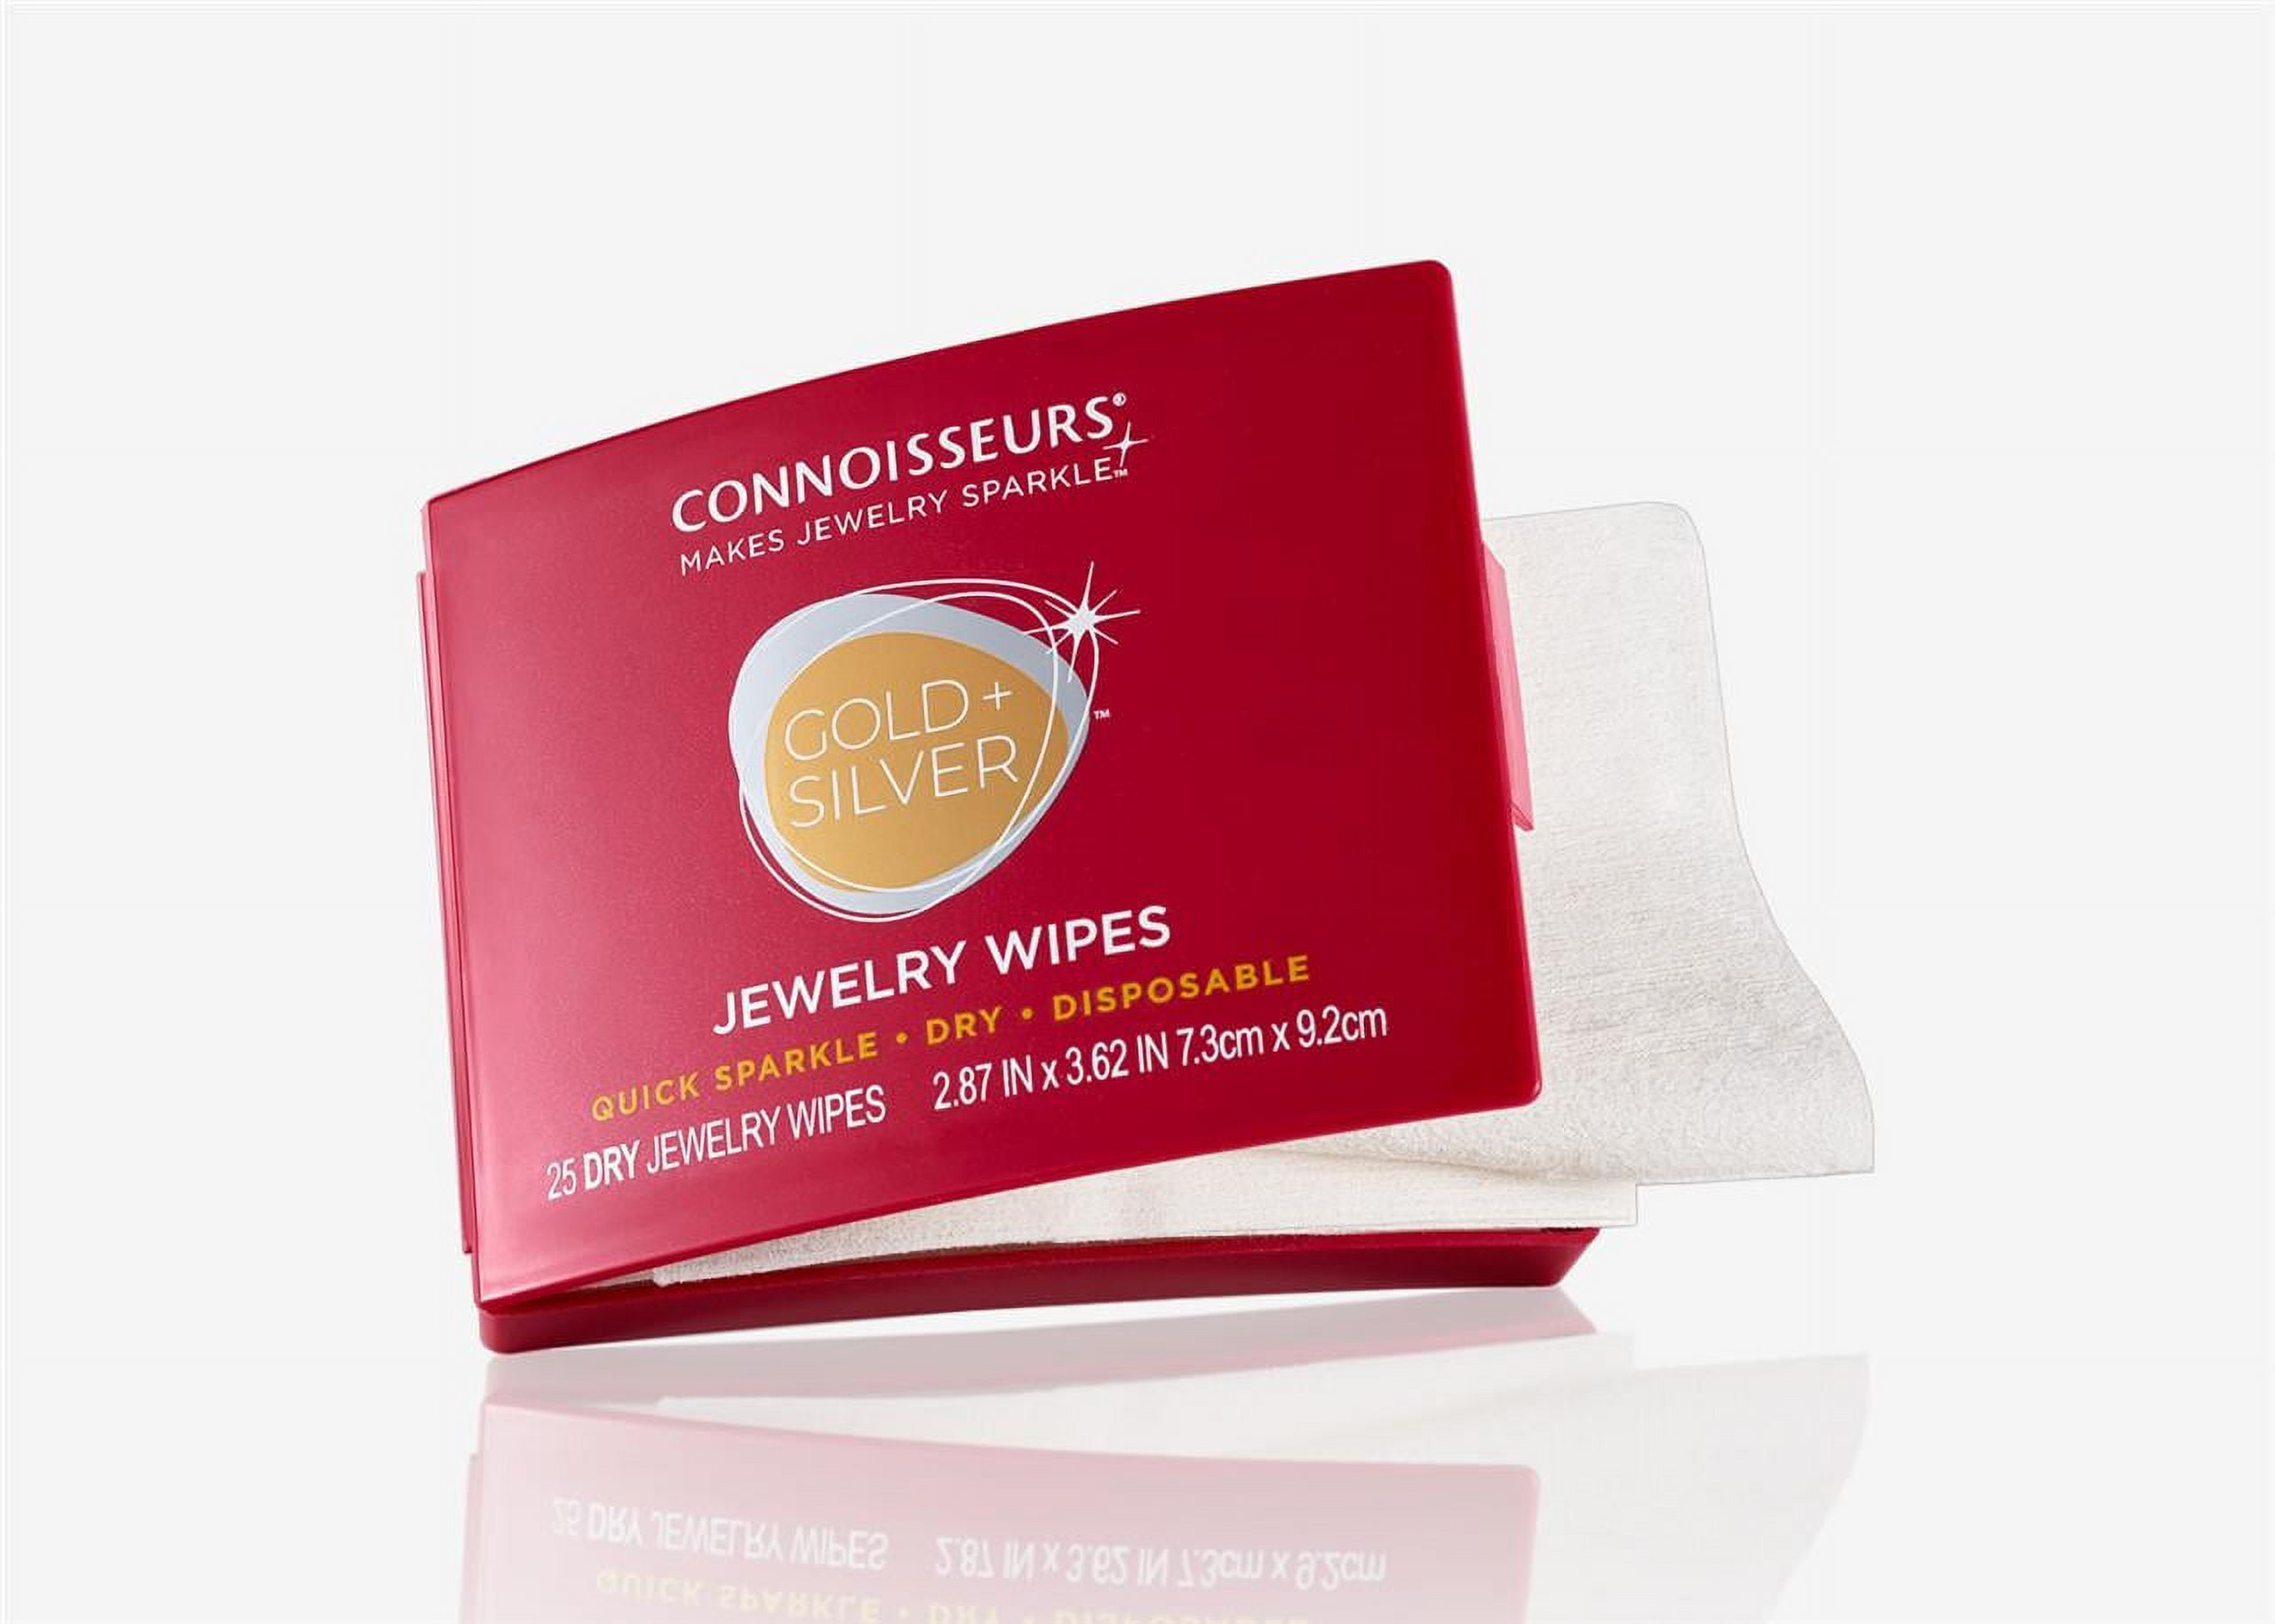 Jewelry Wipes for Gold & Silver – Marie's Jewelry Store